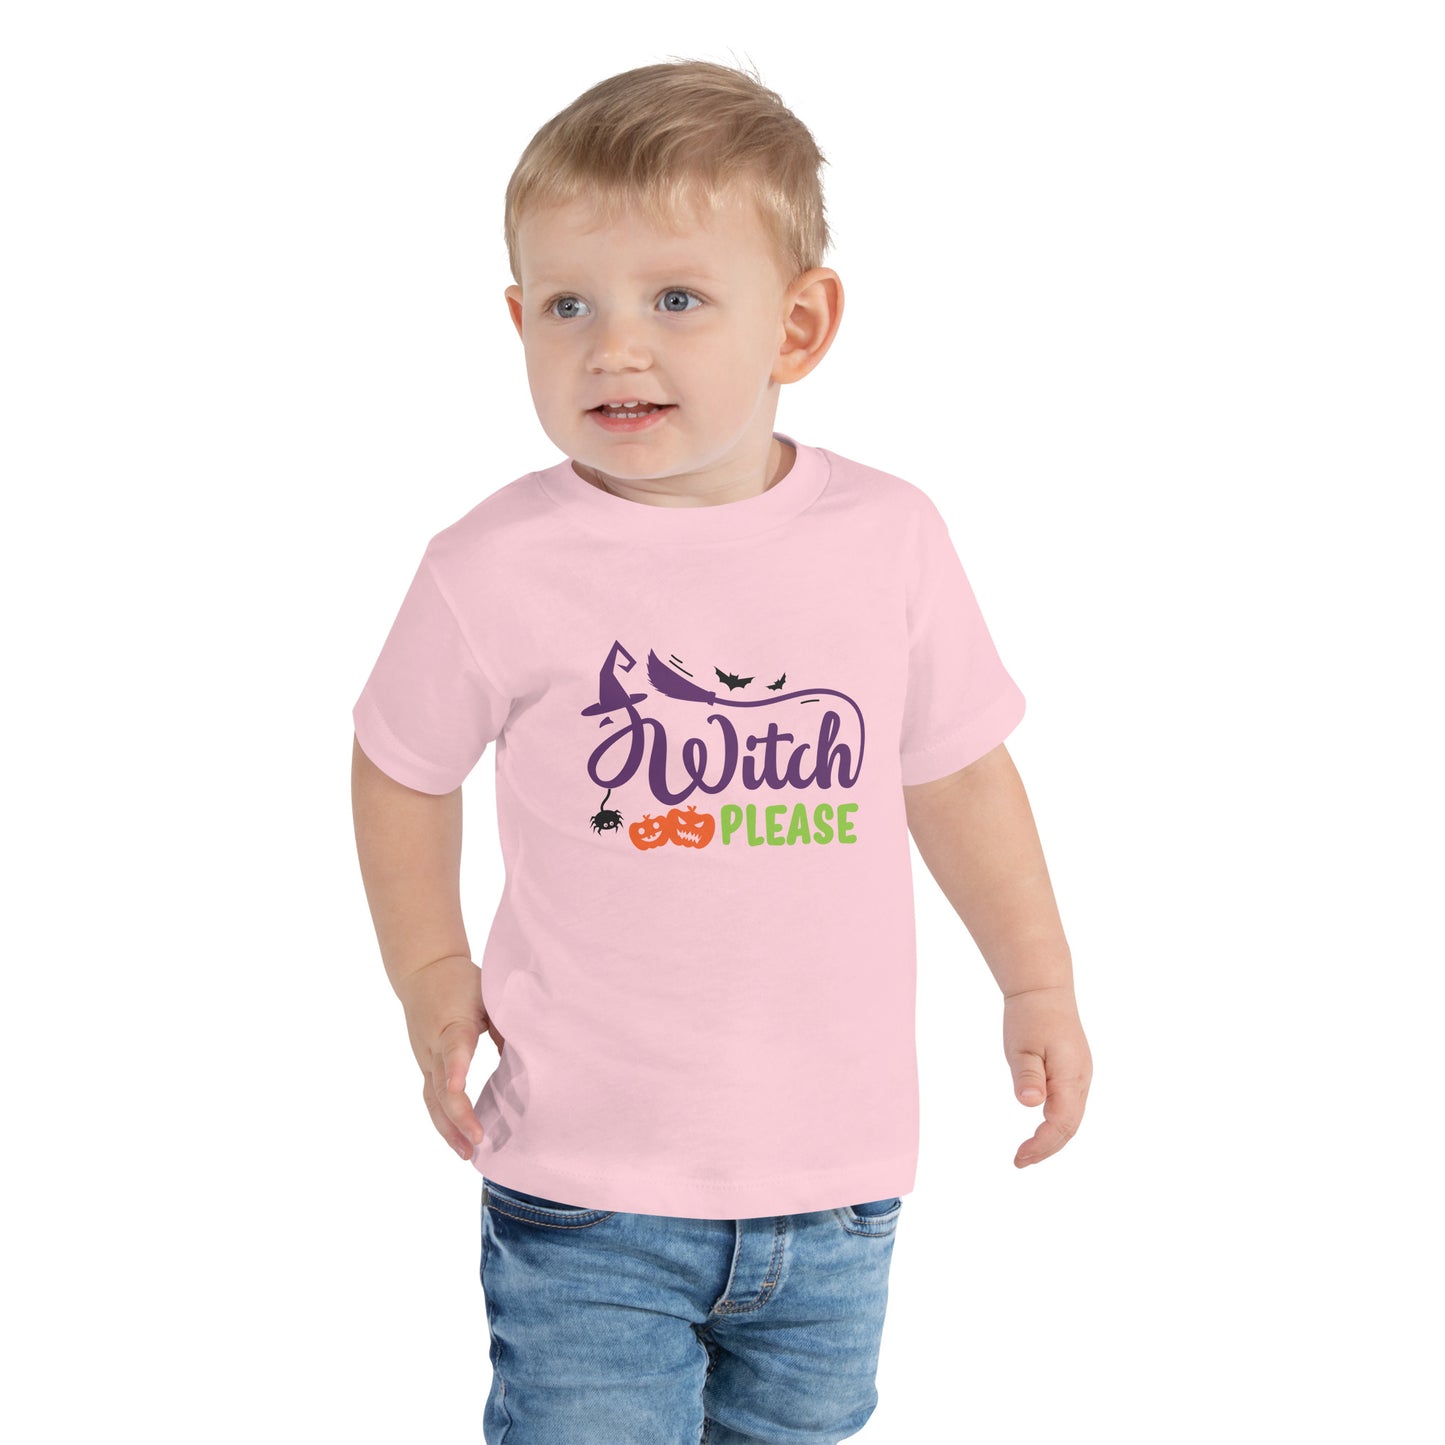 Witch Please Toddler Short Sleeve Tee